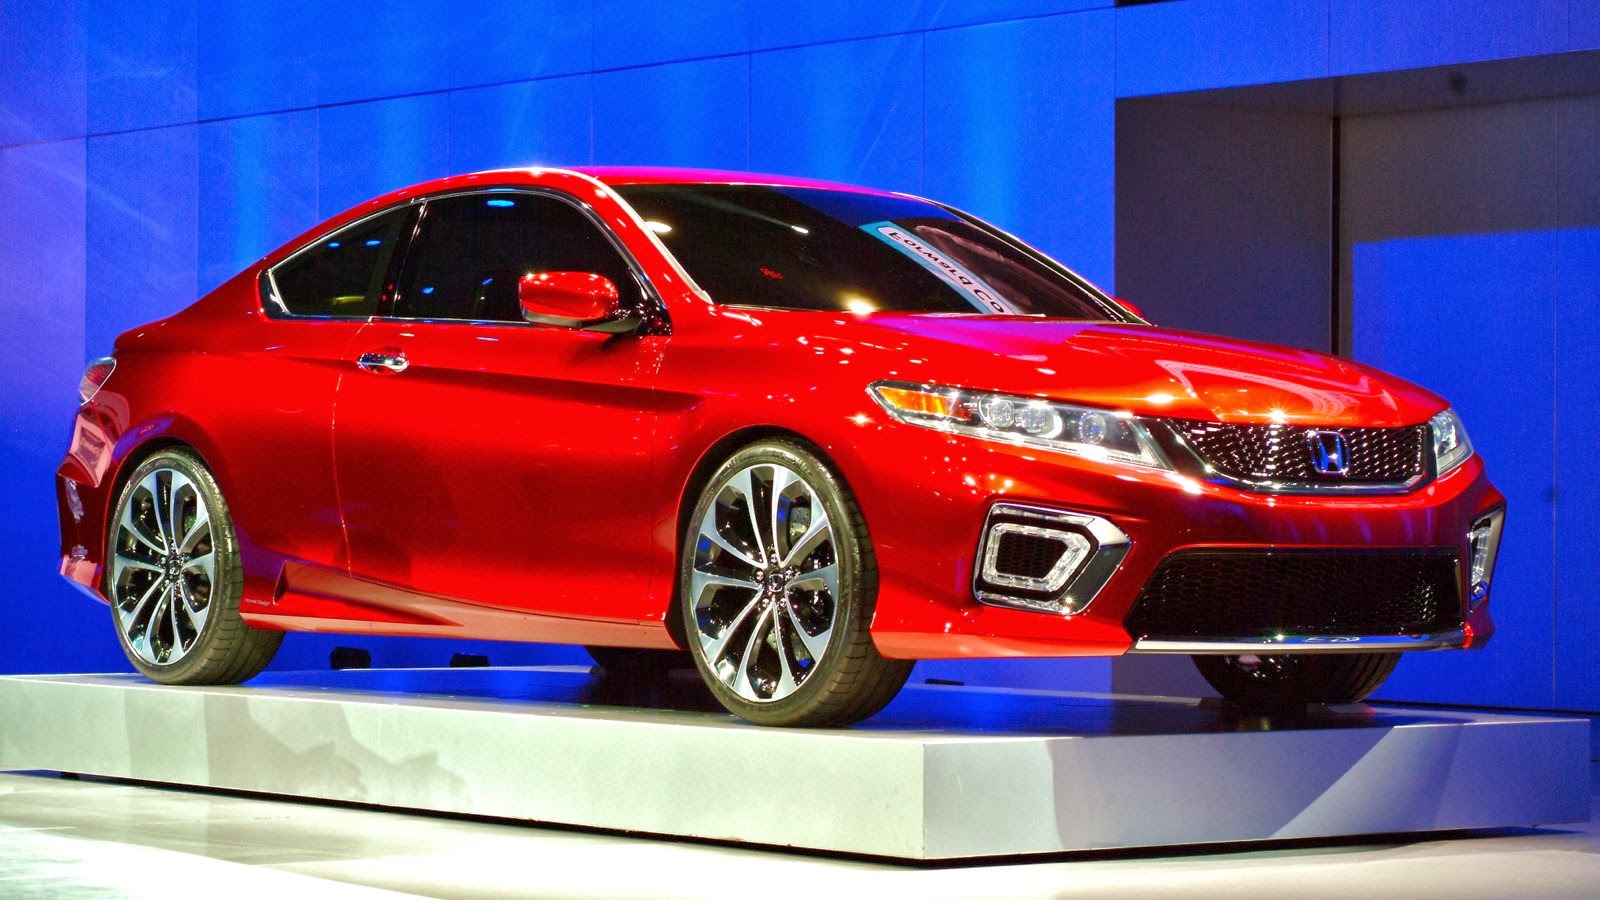 2015 Honda Accord Release Date and Price | Car Release Date, Price and ...